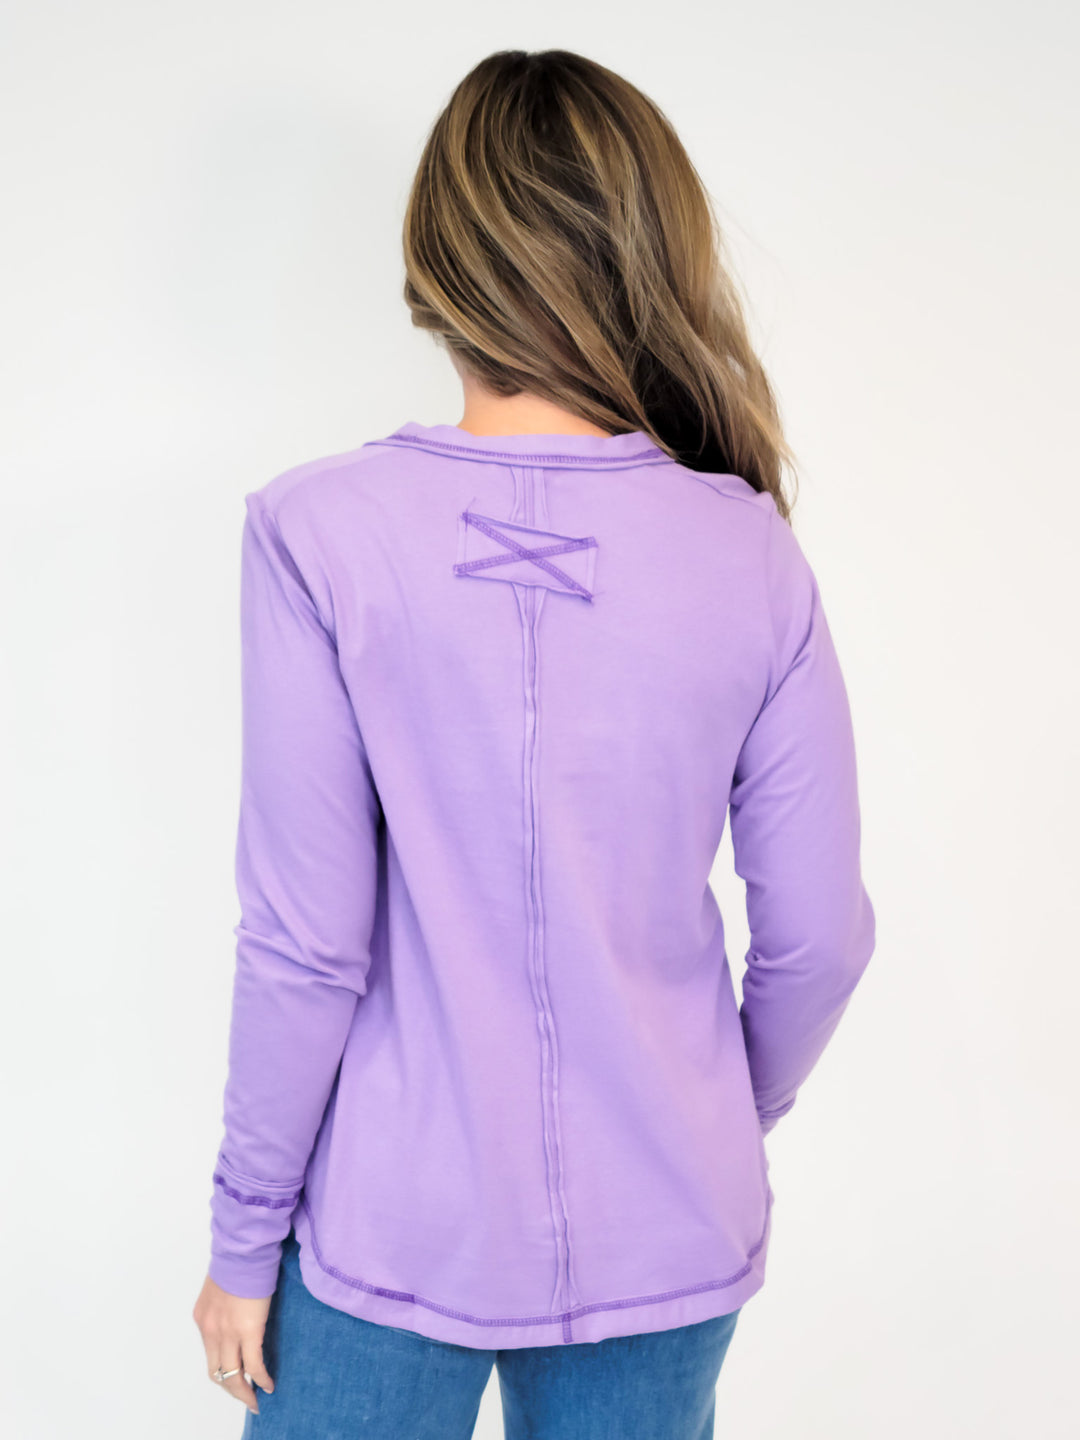 RELAXED LONG SLEEVE HENLEY TOP - LAVENDER